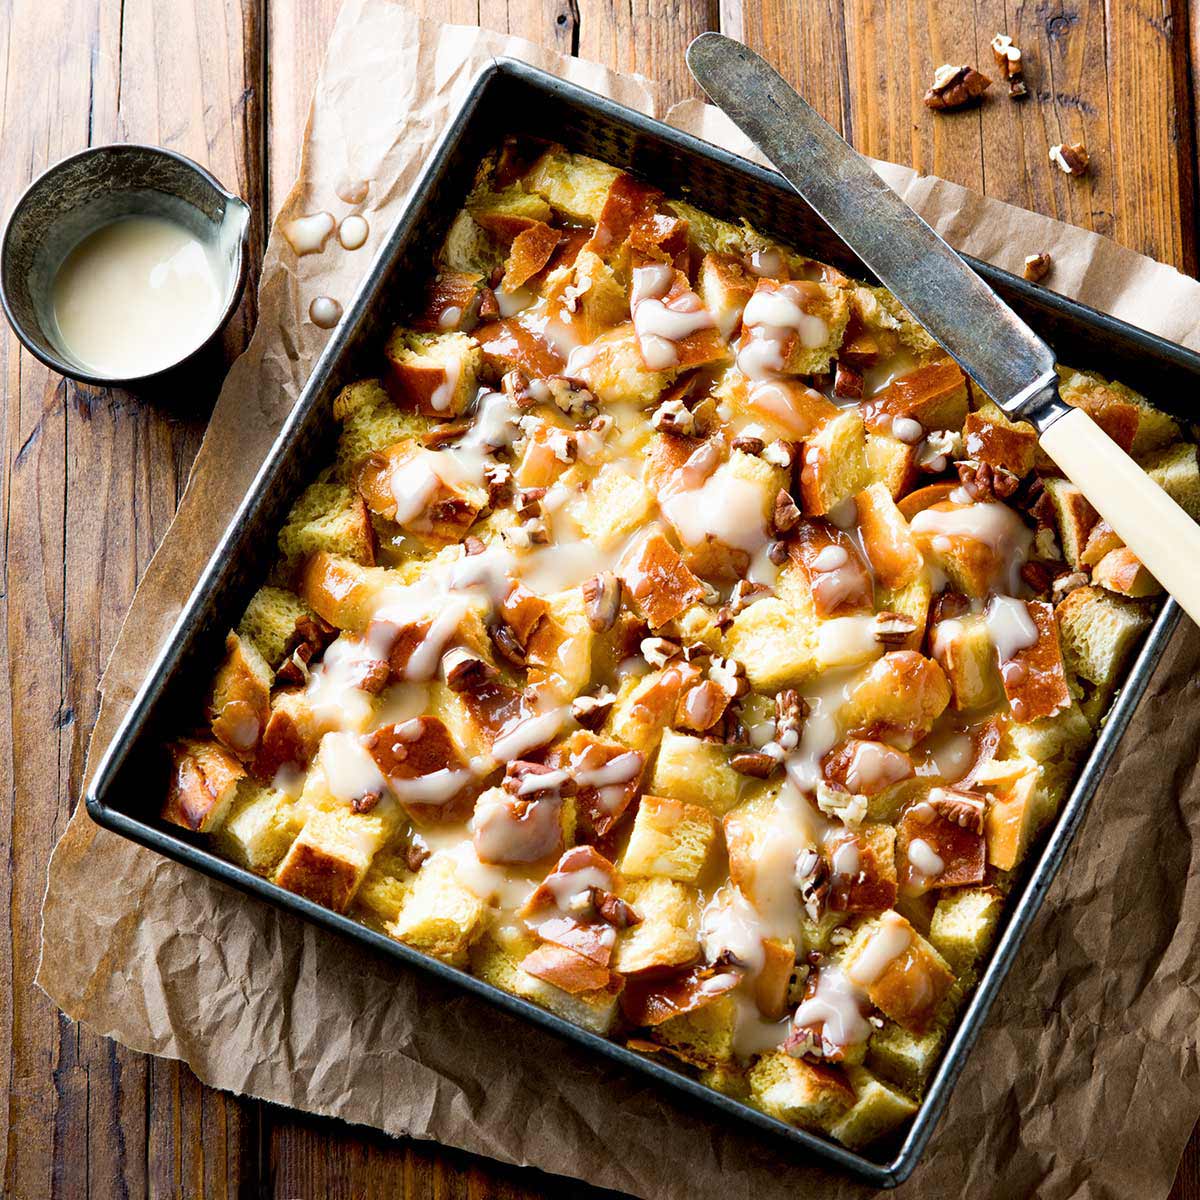 Maple pecan bread pudding with sauce in a square baking pan.